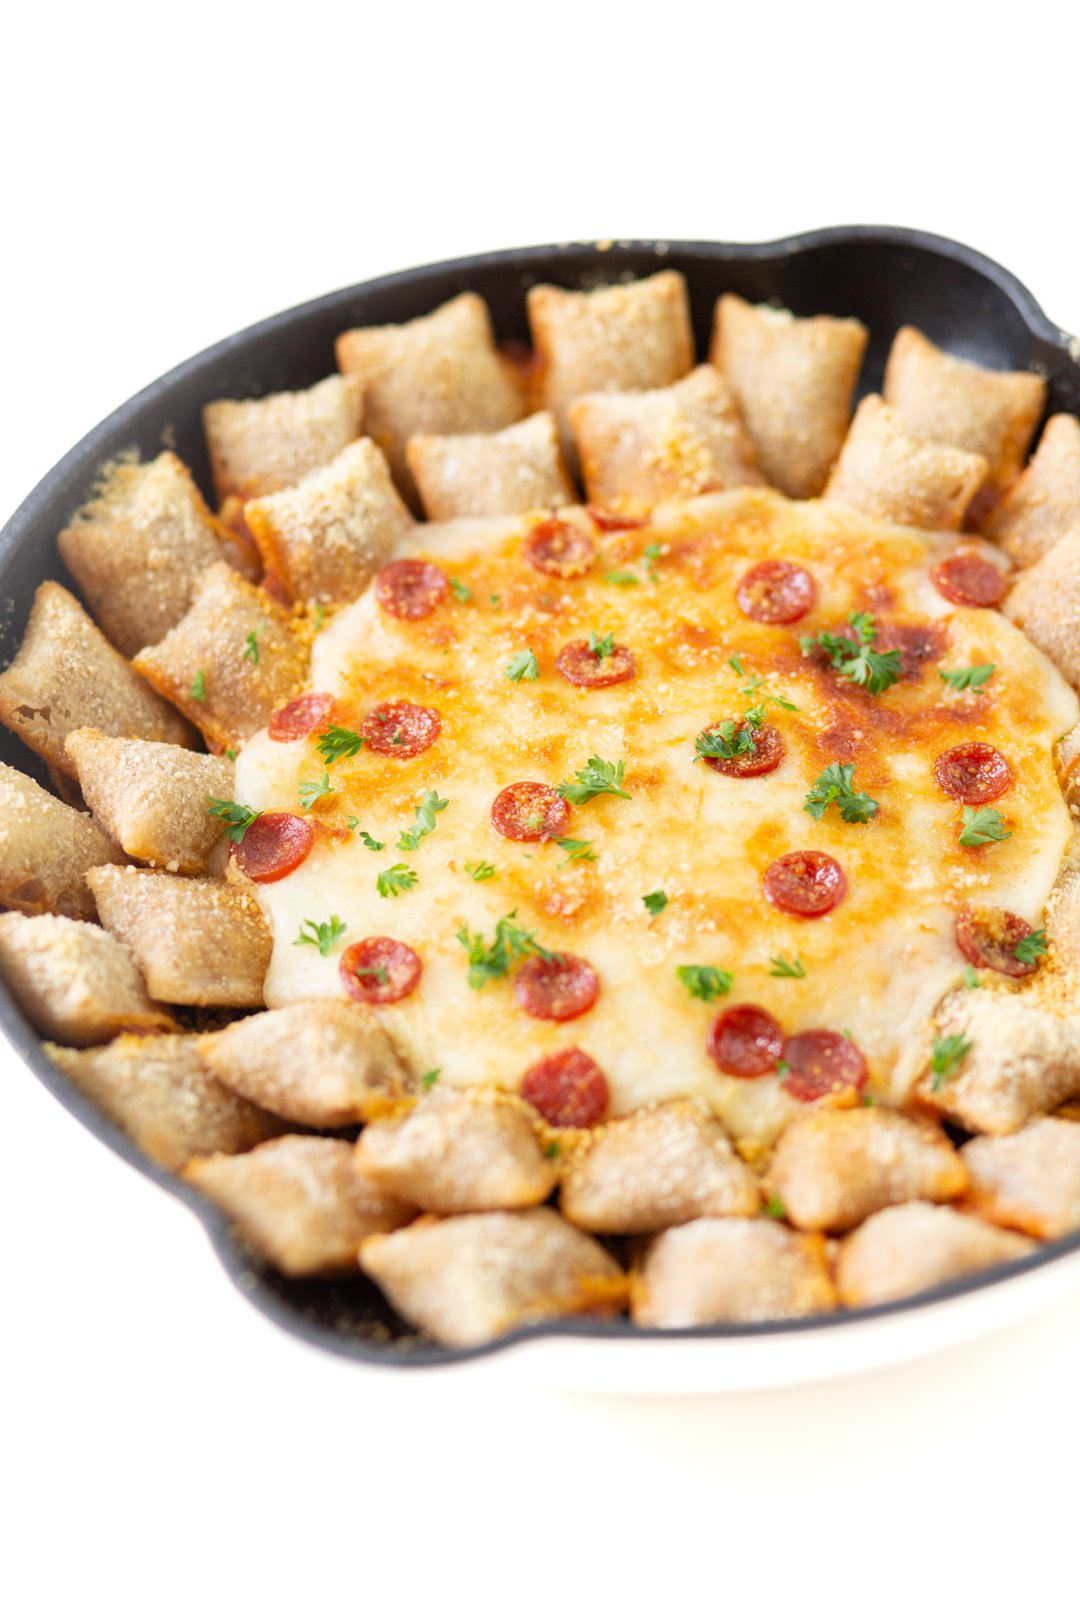 cheesy pepperoni dip up close being served in a skillet with totinos pizza rolls, melted cheese, crispy mini pepperoni and snipped parsley garnish.